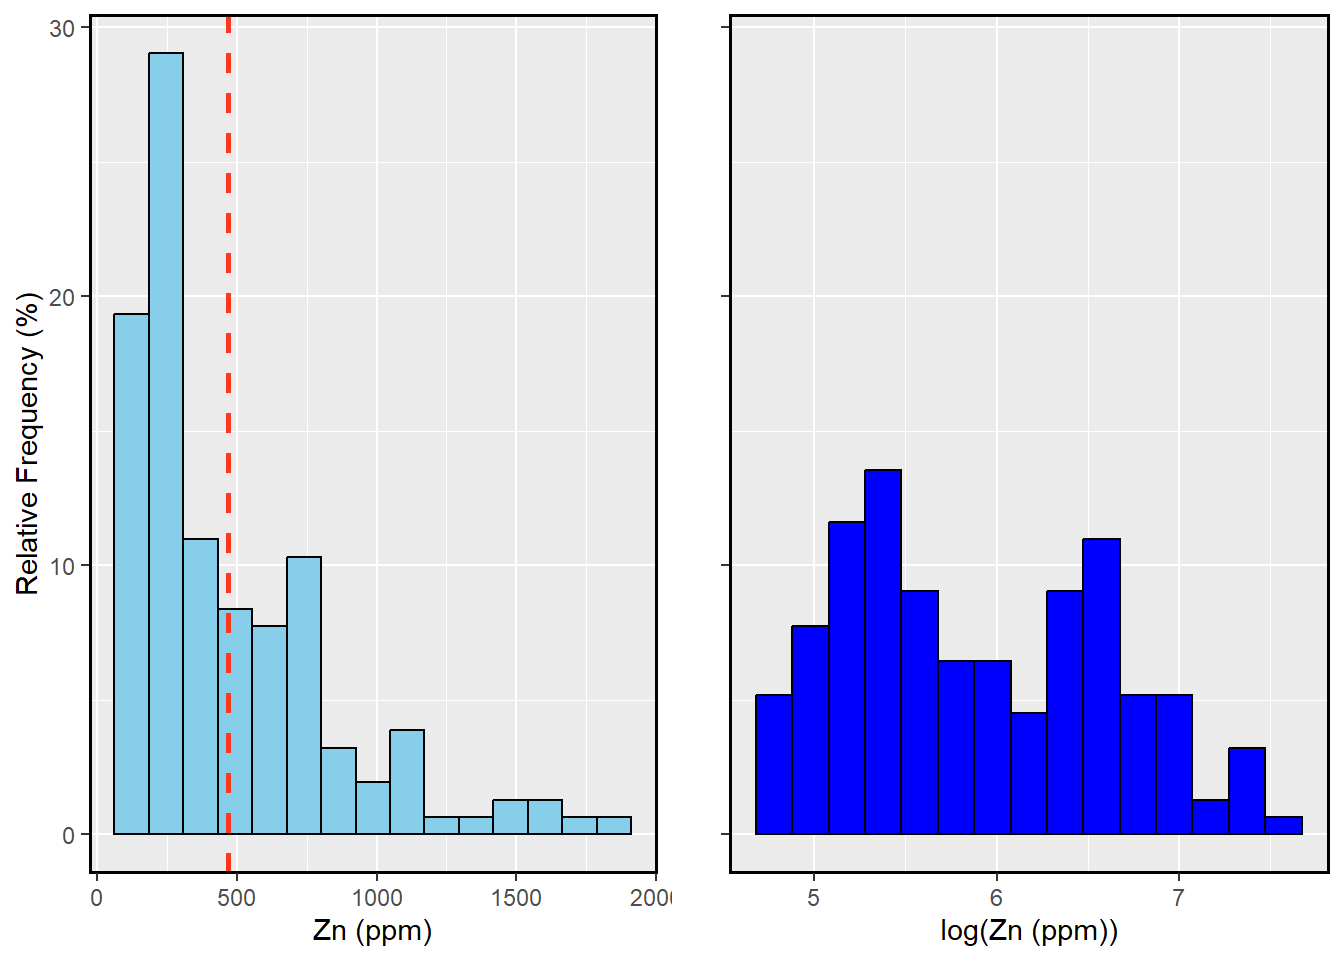 Figure: Histogram of Zn(ppm) and log(Zn(ppm))